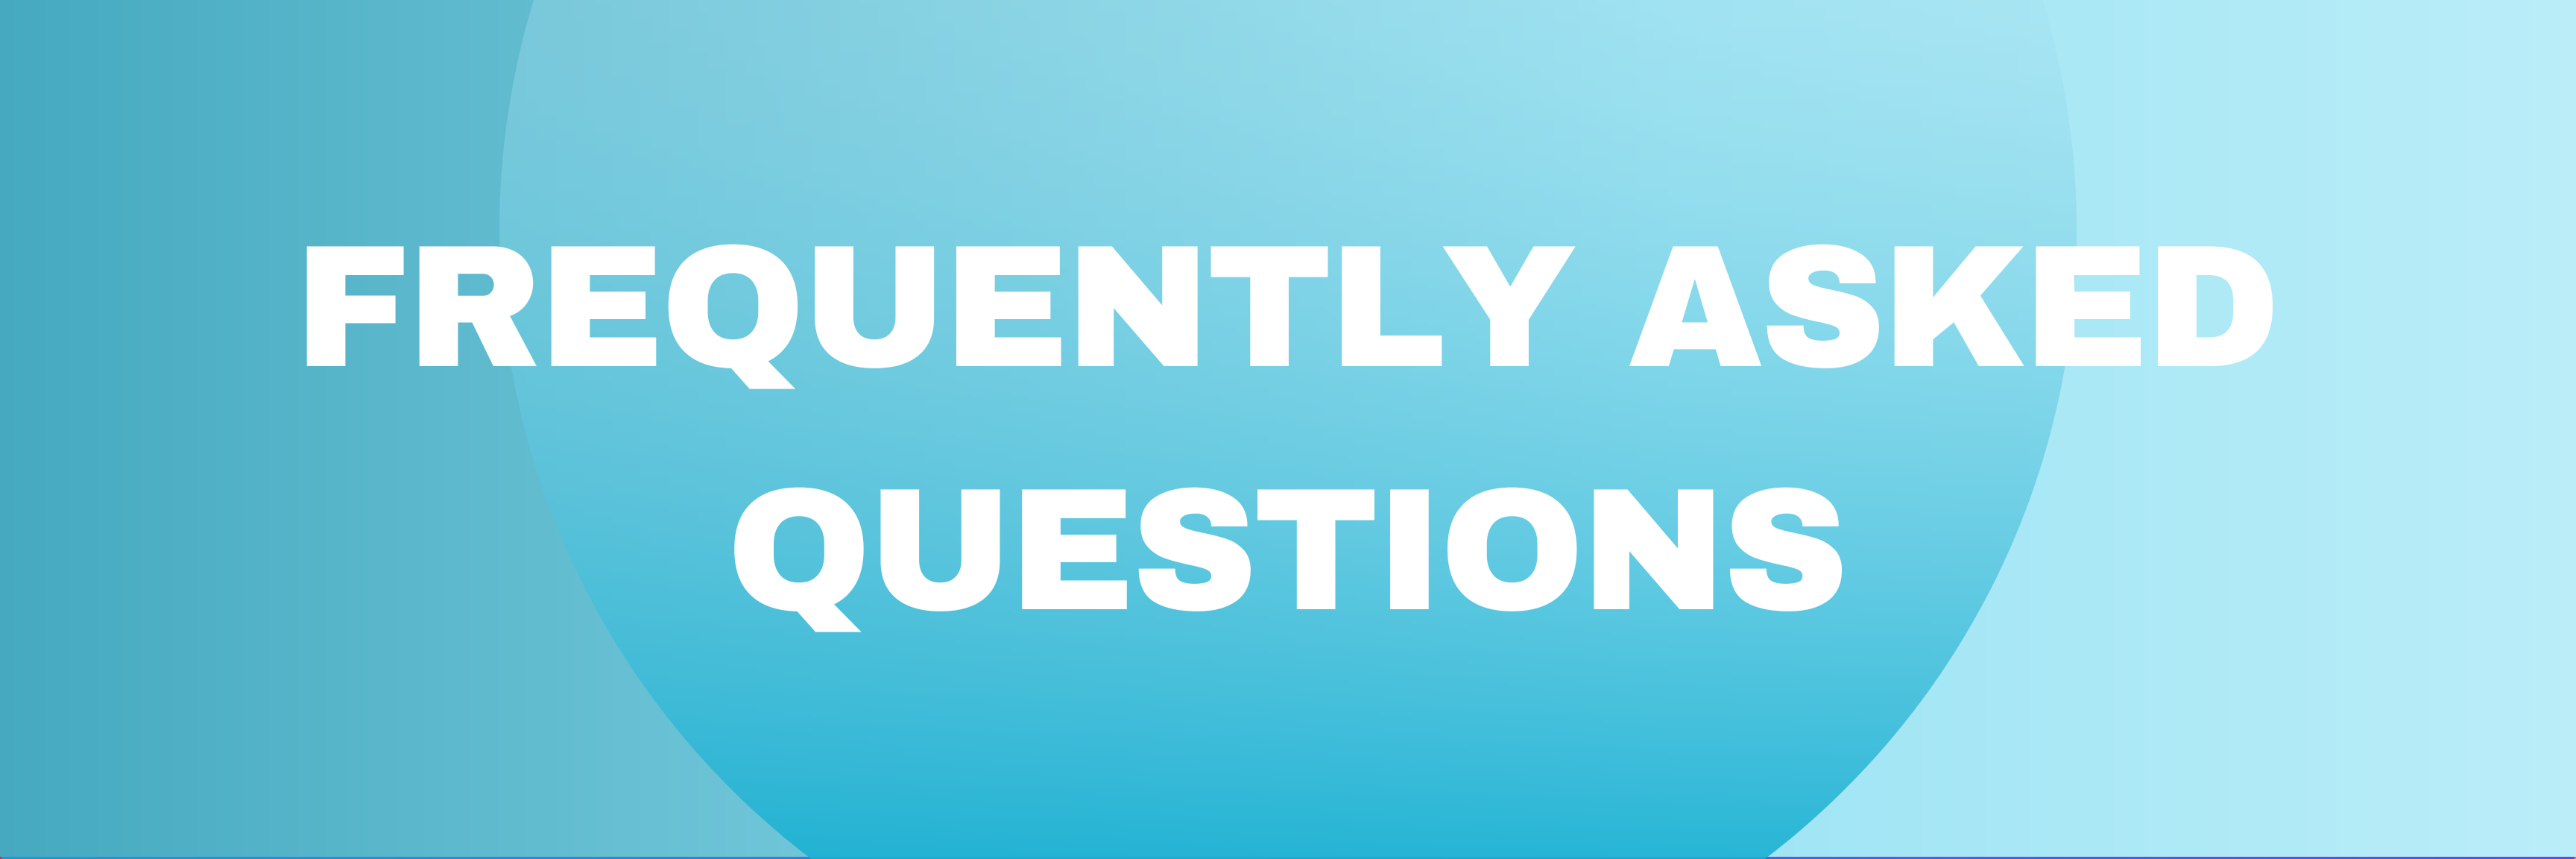 Frequently Asked Questions page banner